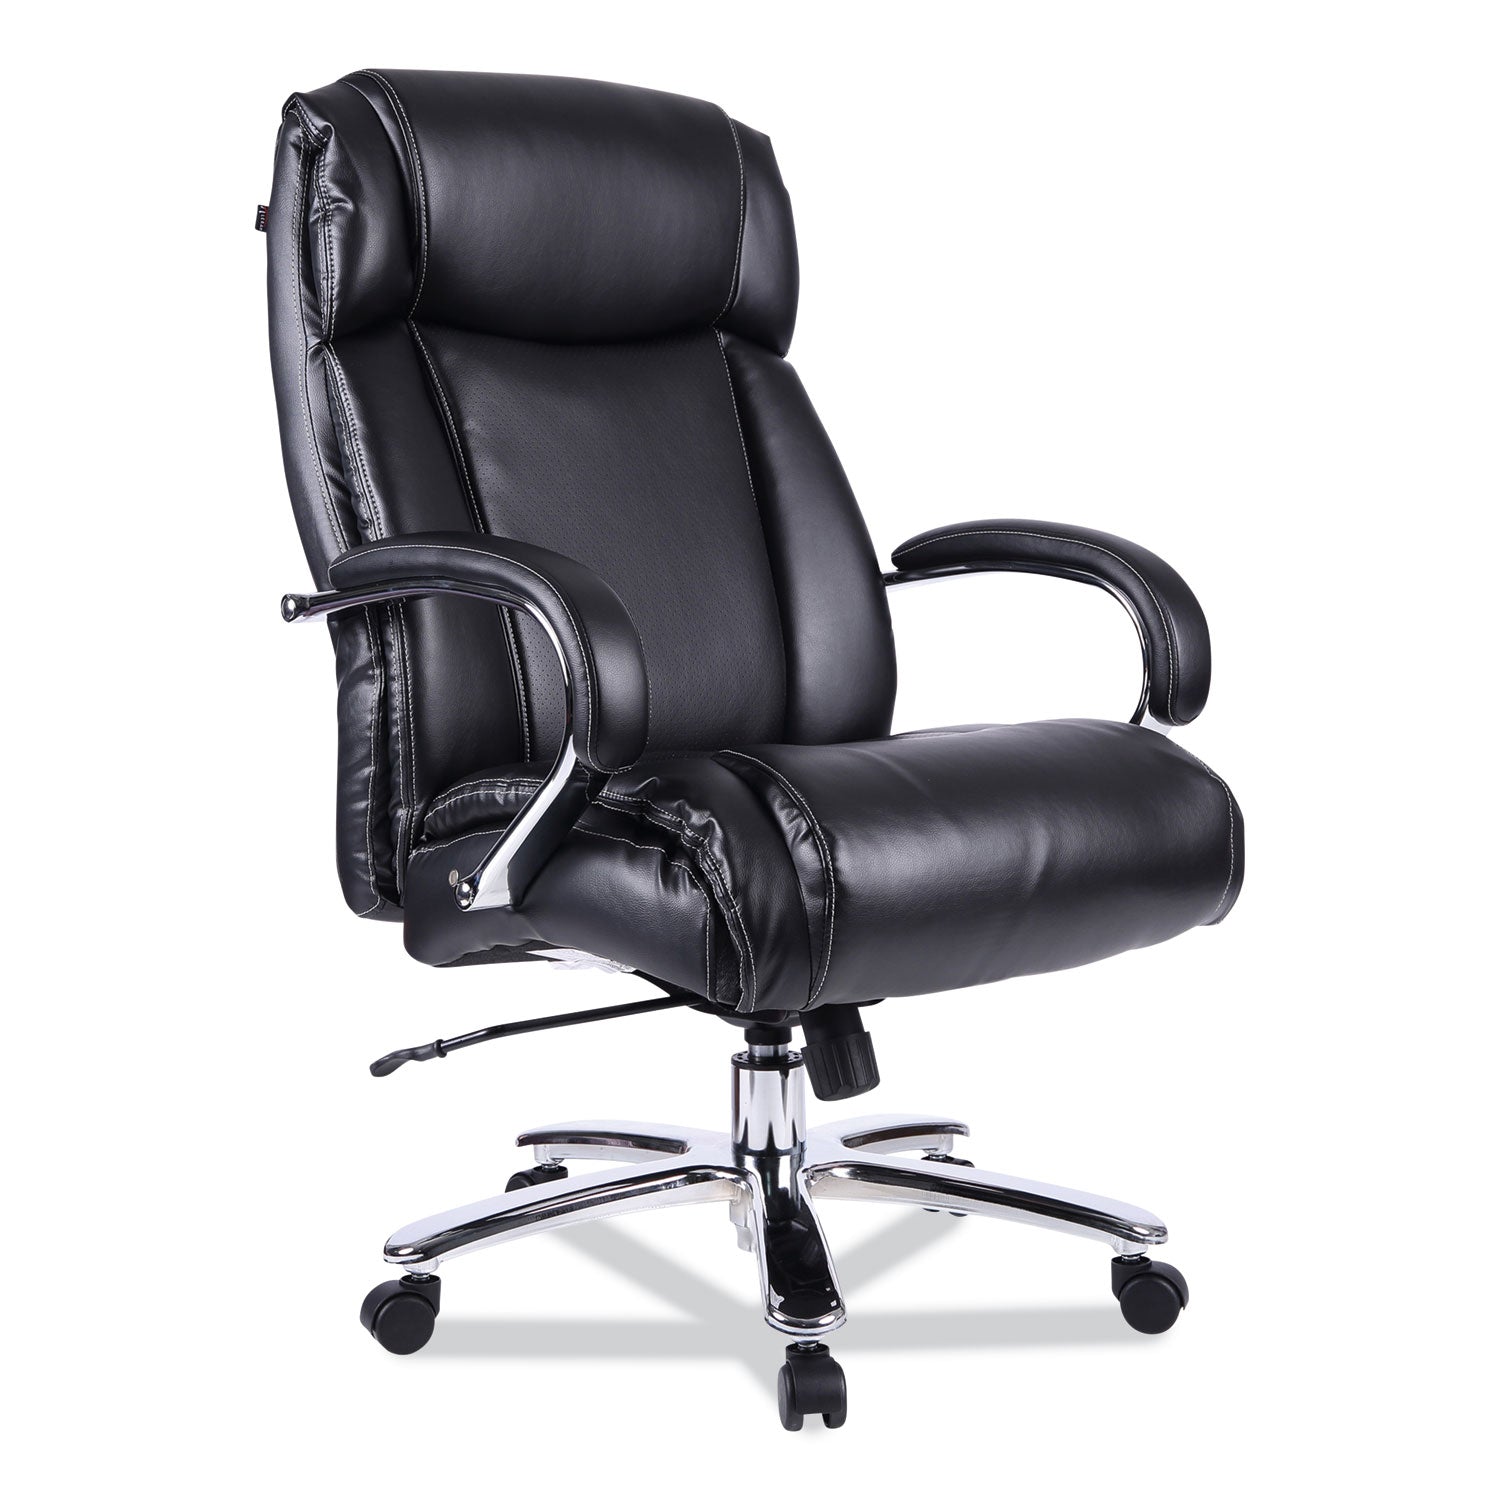 alera-maxxis-series-big-tall-bonded-leather-chair-supports-500-lb-2142-to-25-seat-height-black-seat-back-chrome-base_alems4419 - 1